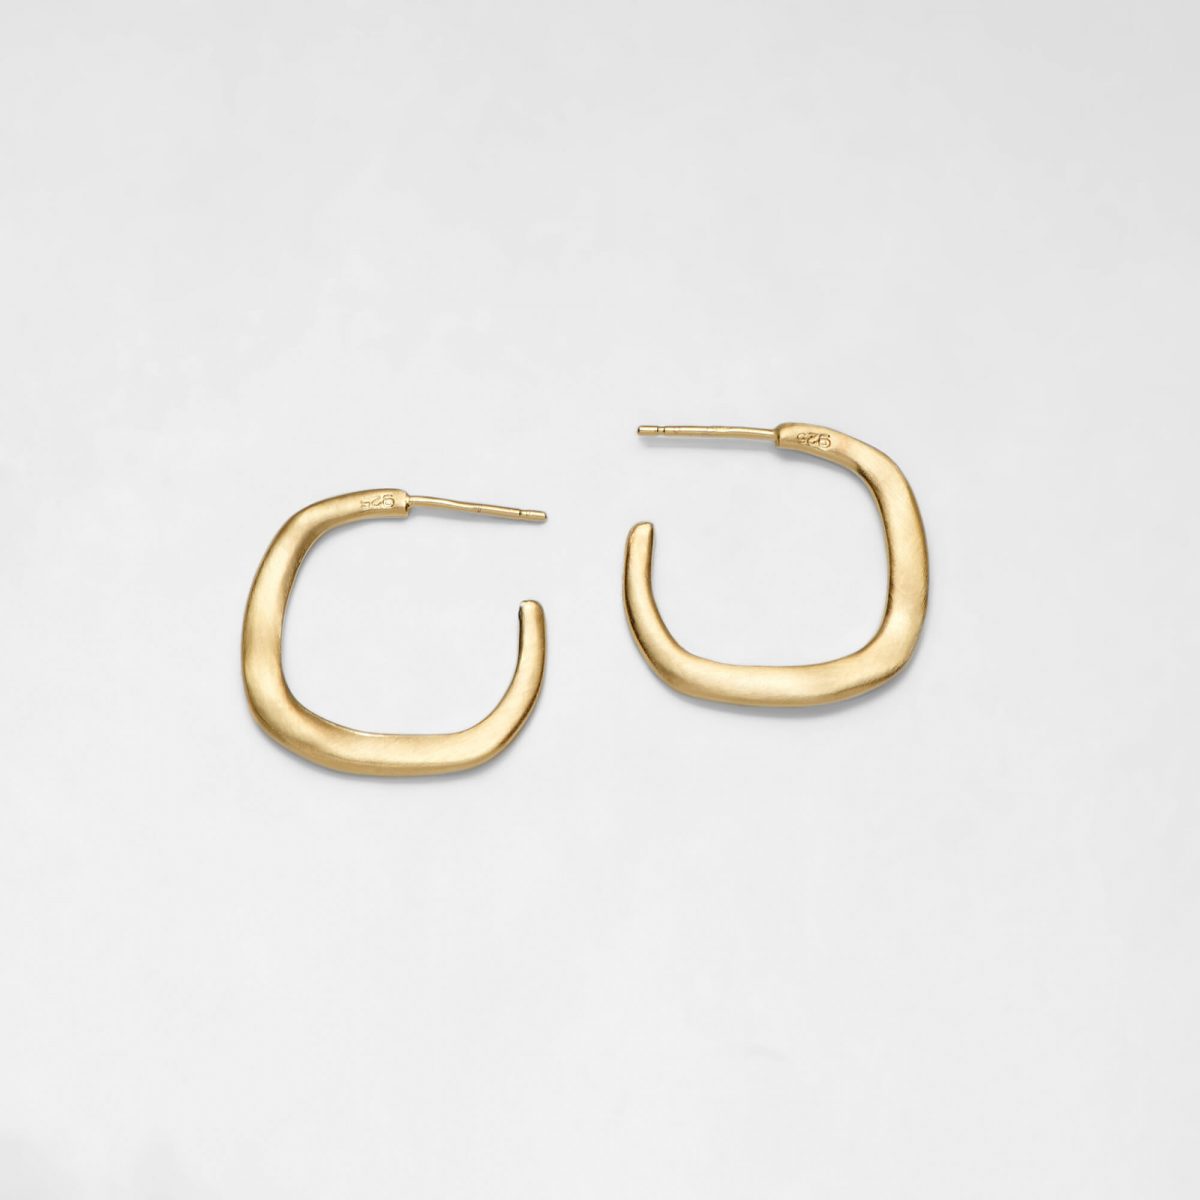 Gold Square Hoops by Xoutou's